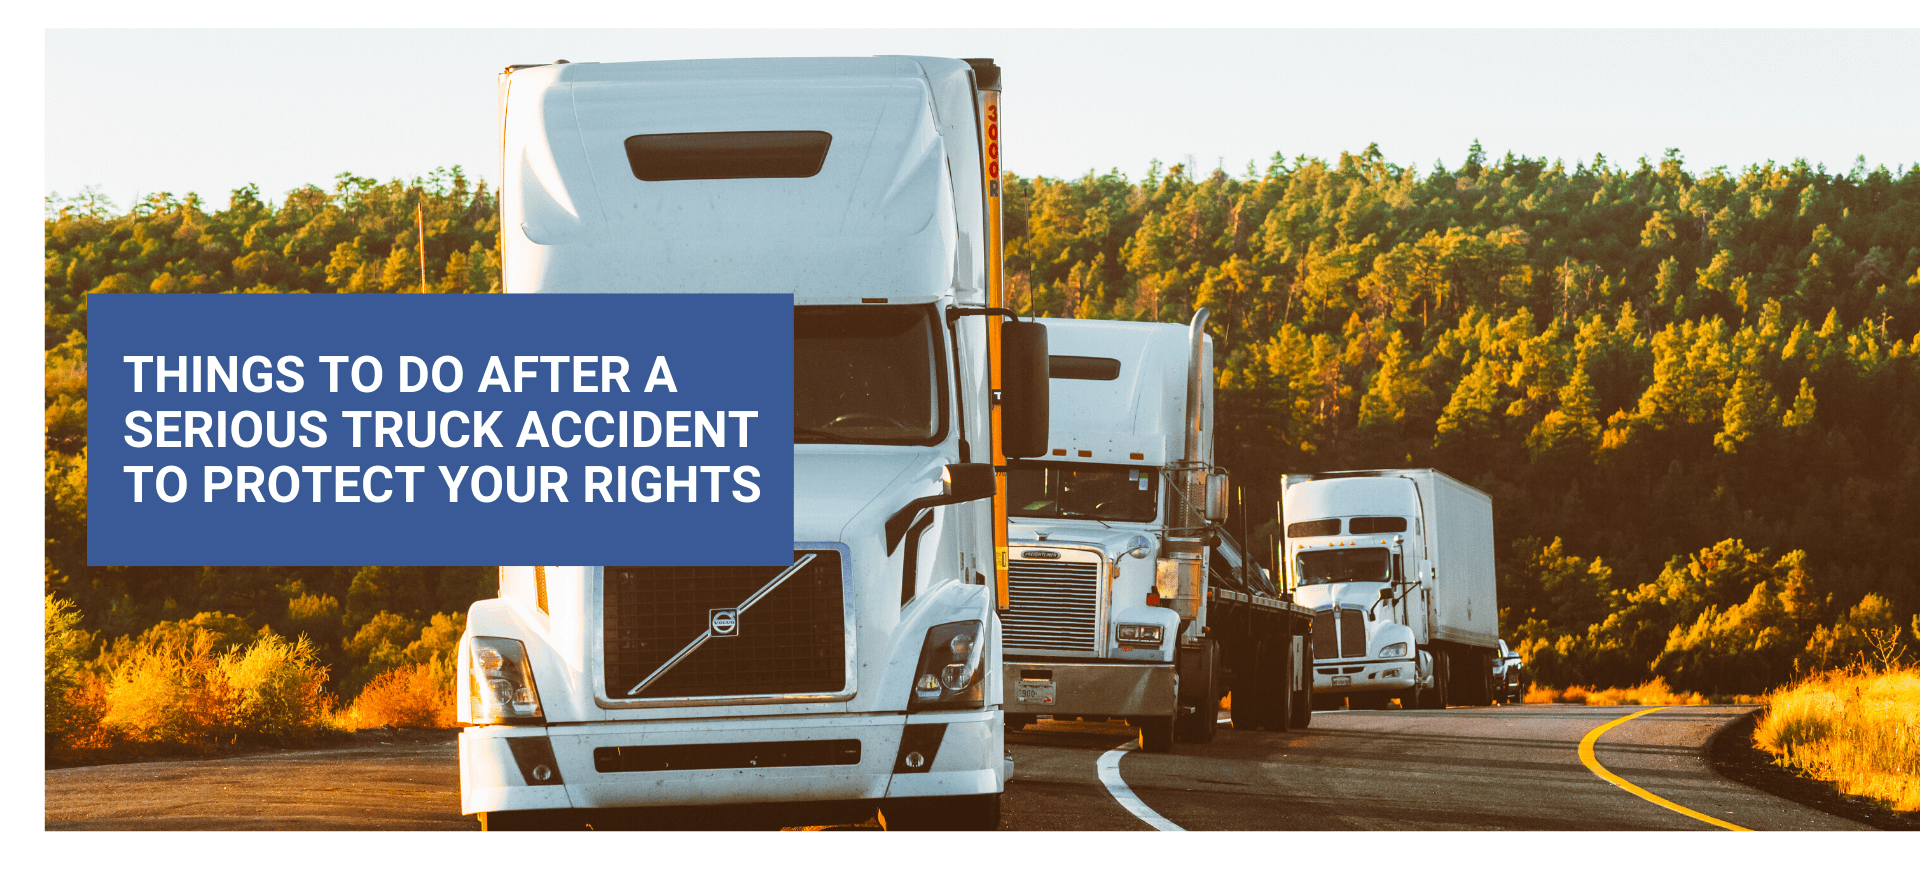 4 Things to Do after a Serious Truck Accident to Protect Your Rights